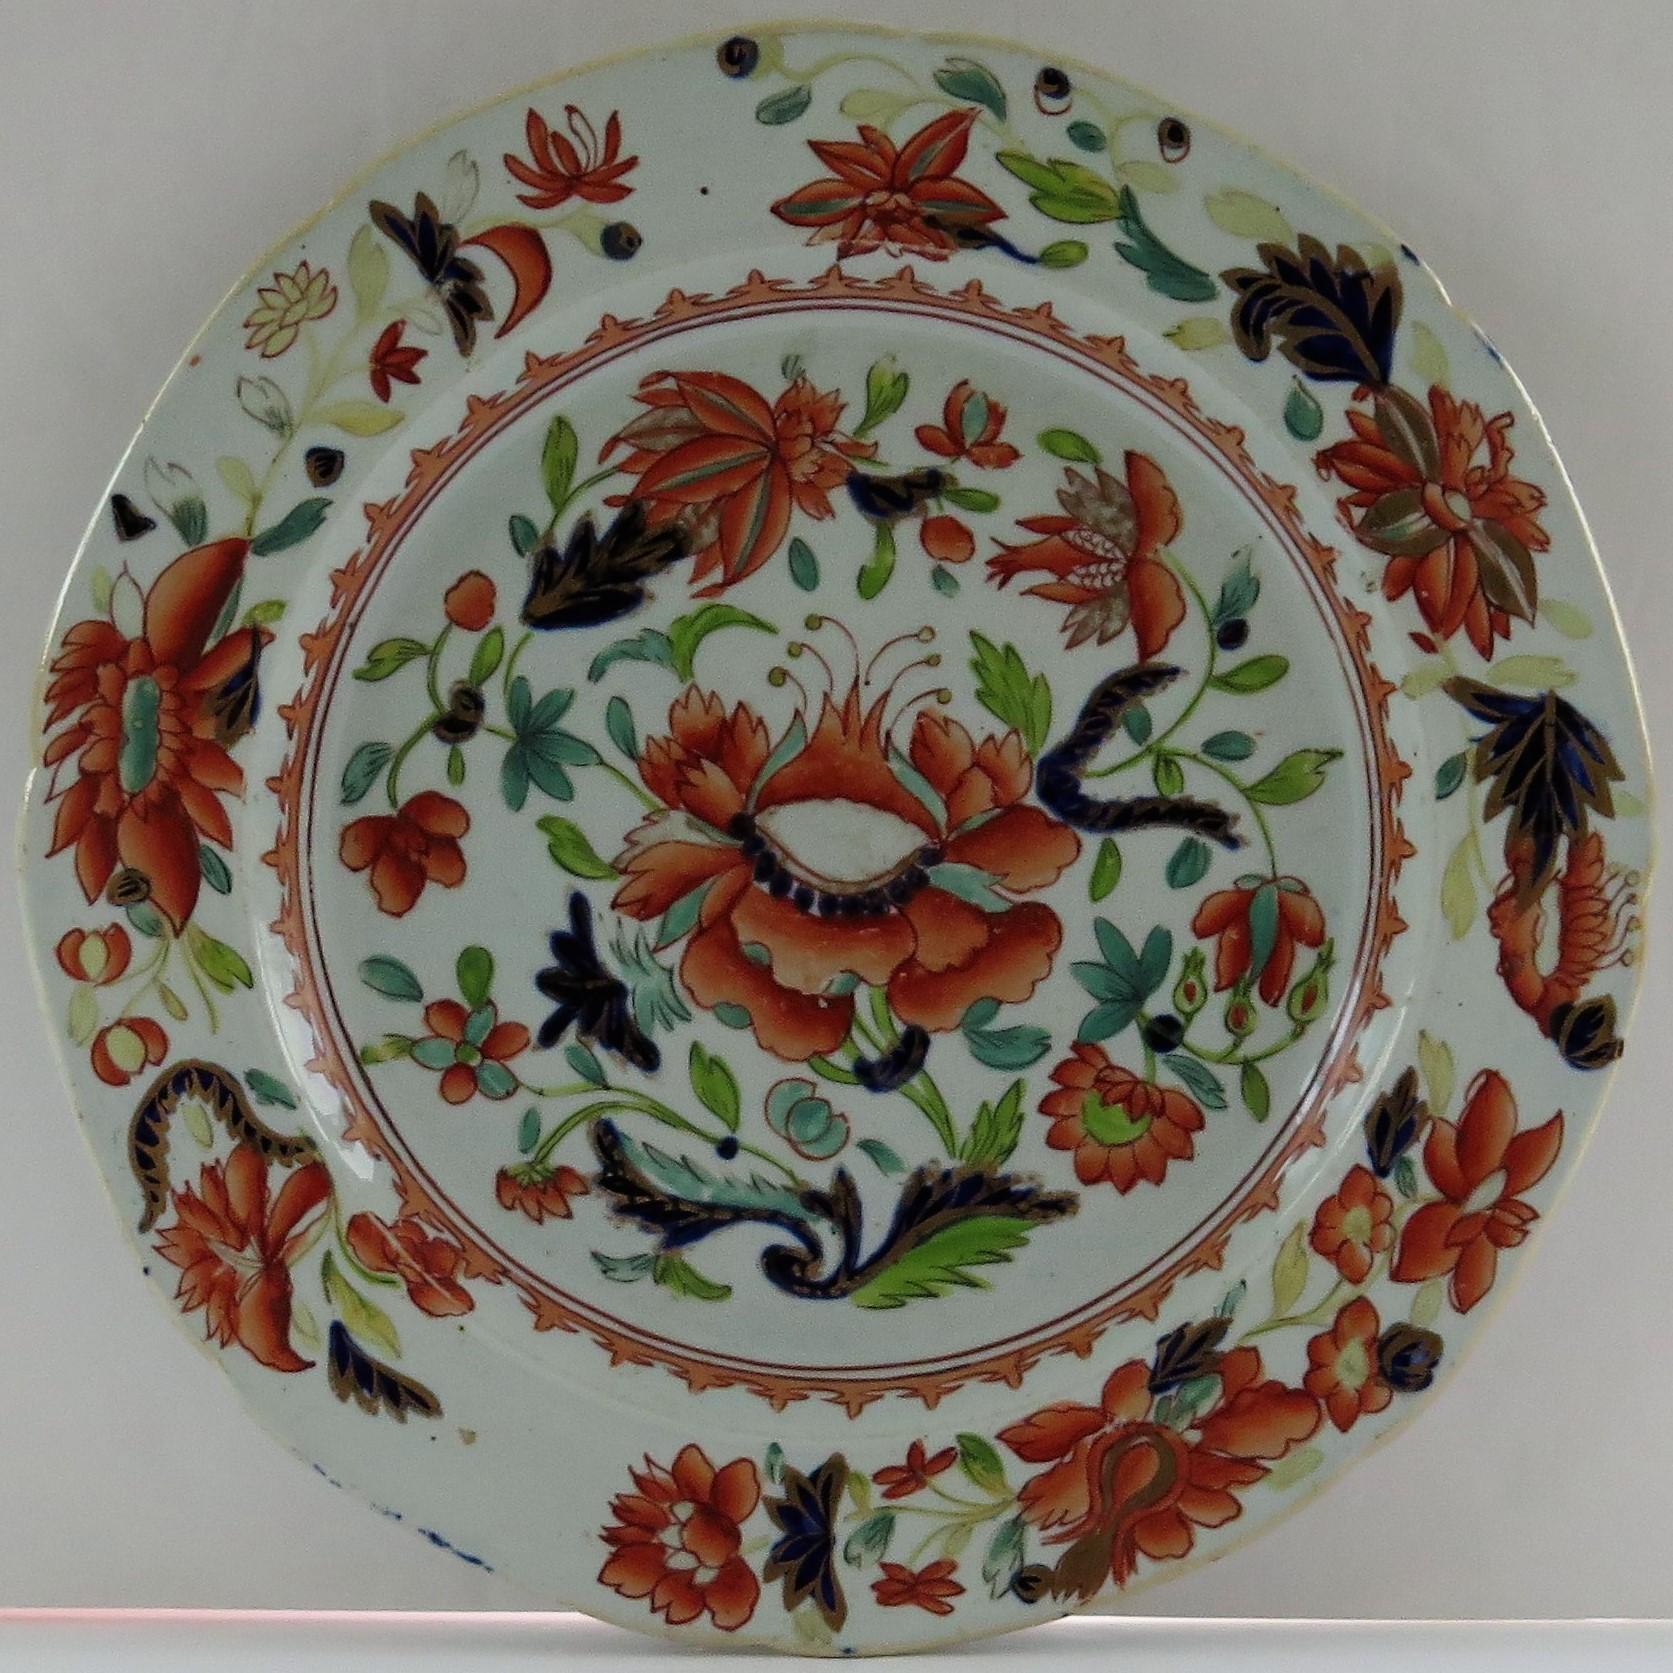 This is a rare set of six early dinner plates, all hand painted in the large stamen flower pattern, made by Mason's Ironstone, Lane Delph, England and dating to circa 1813-1820.

The plates have a circular shape, with a slightly indented rim and